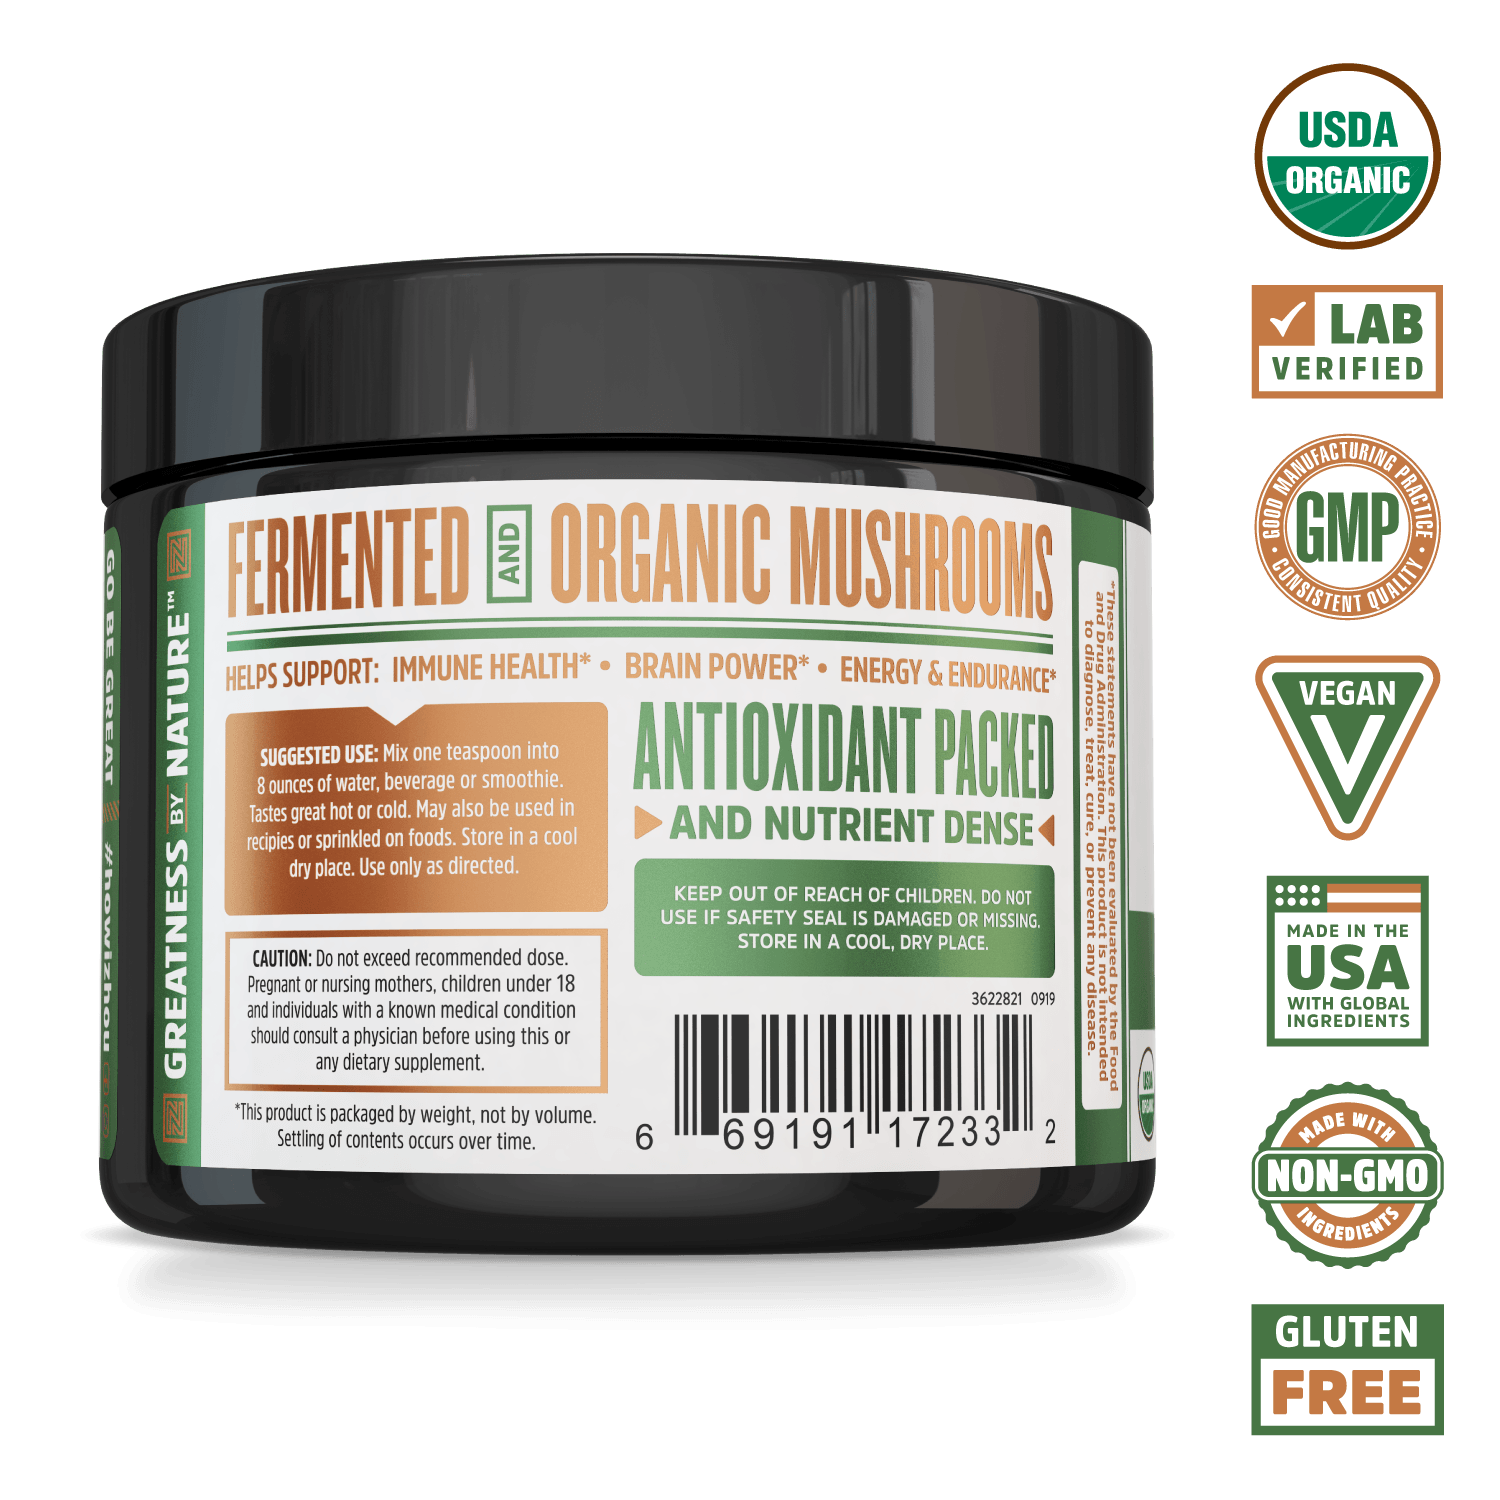 Mushroom 8-Plex Fermented Organic Mushroom Powder Supplement from Zhou Nutrition. USDA organic, lab verified, good manufacturing practices, vegan, made in the USA with global ingredients, made with non-GMO ingredients, gluten free